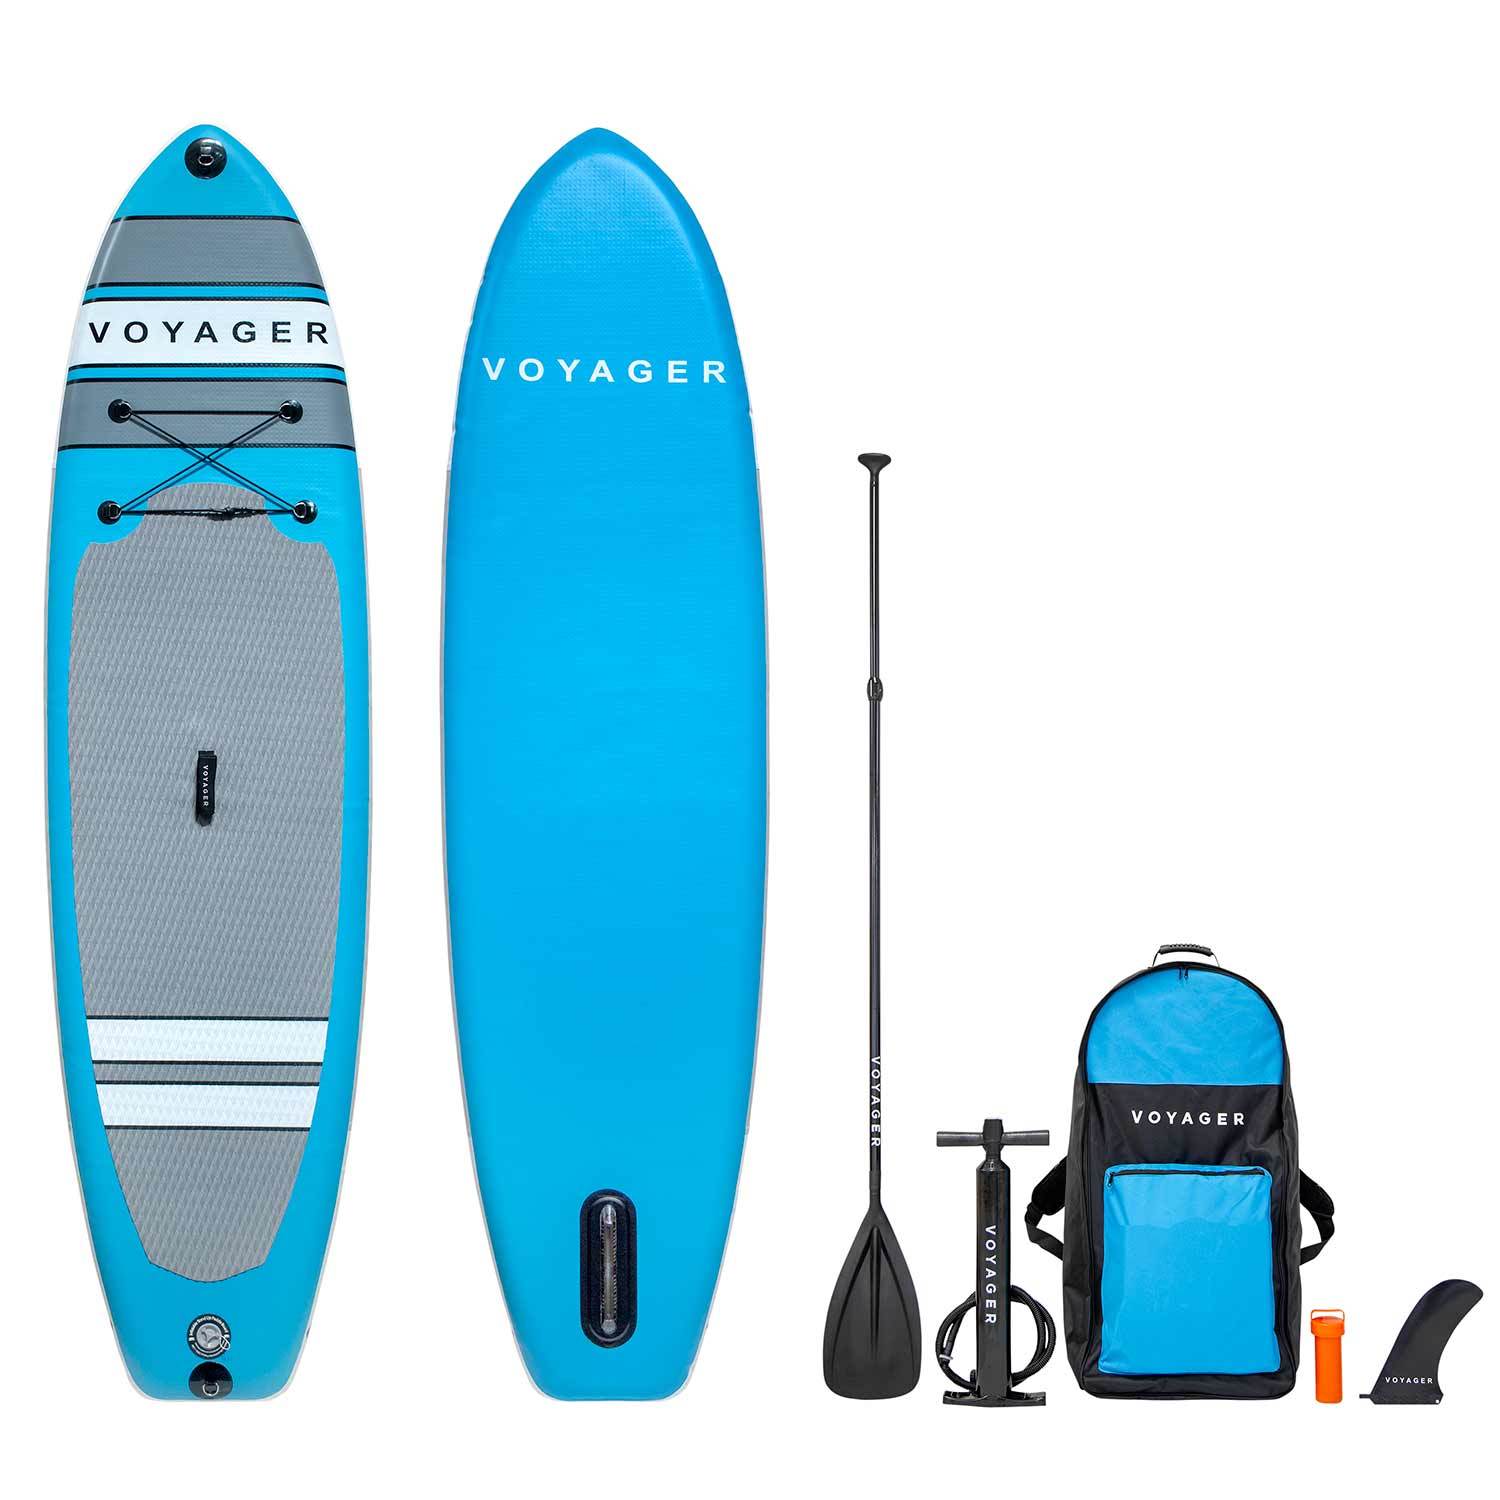 Fin — 116 Long x 31 Wide x 7.5 Thick Up to 300 lbs Capacity ISLE Voyager Rigid Epoxy Stand Up Paddle Board with SUP Package — Wood Grain Board Includes Paddle Leash 